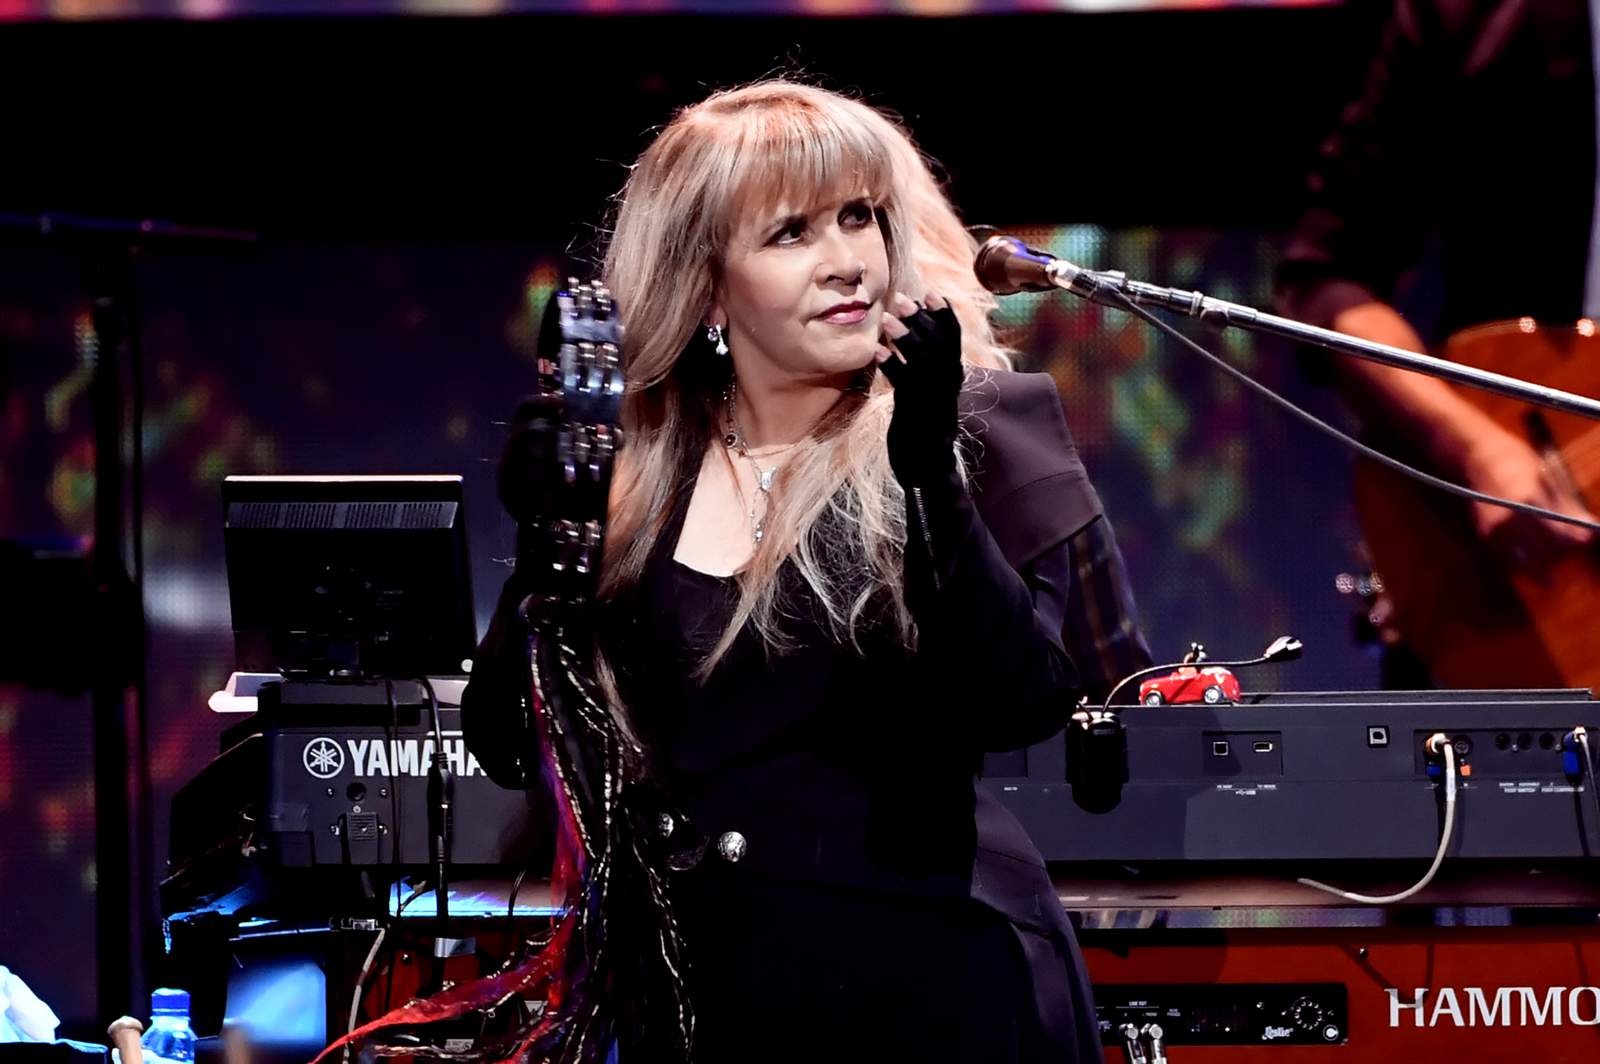 Stevie Nicks joined TikTok so she could lace up her skates, sing ‘Dreams’ and drink some Ocean Spray